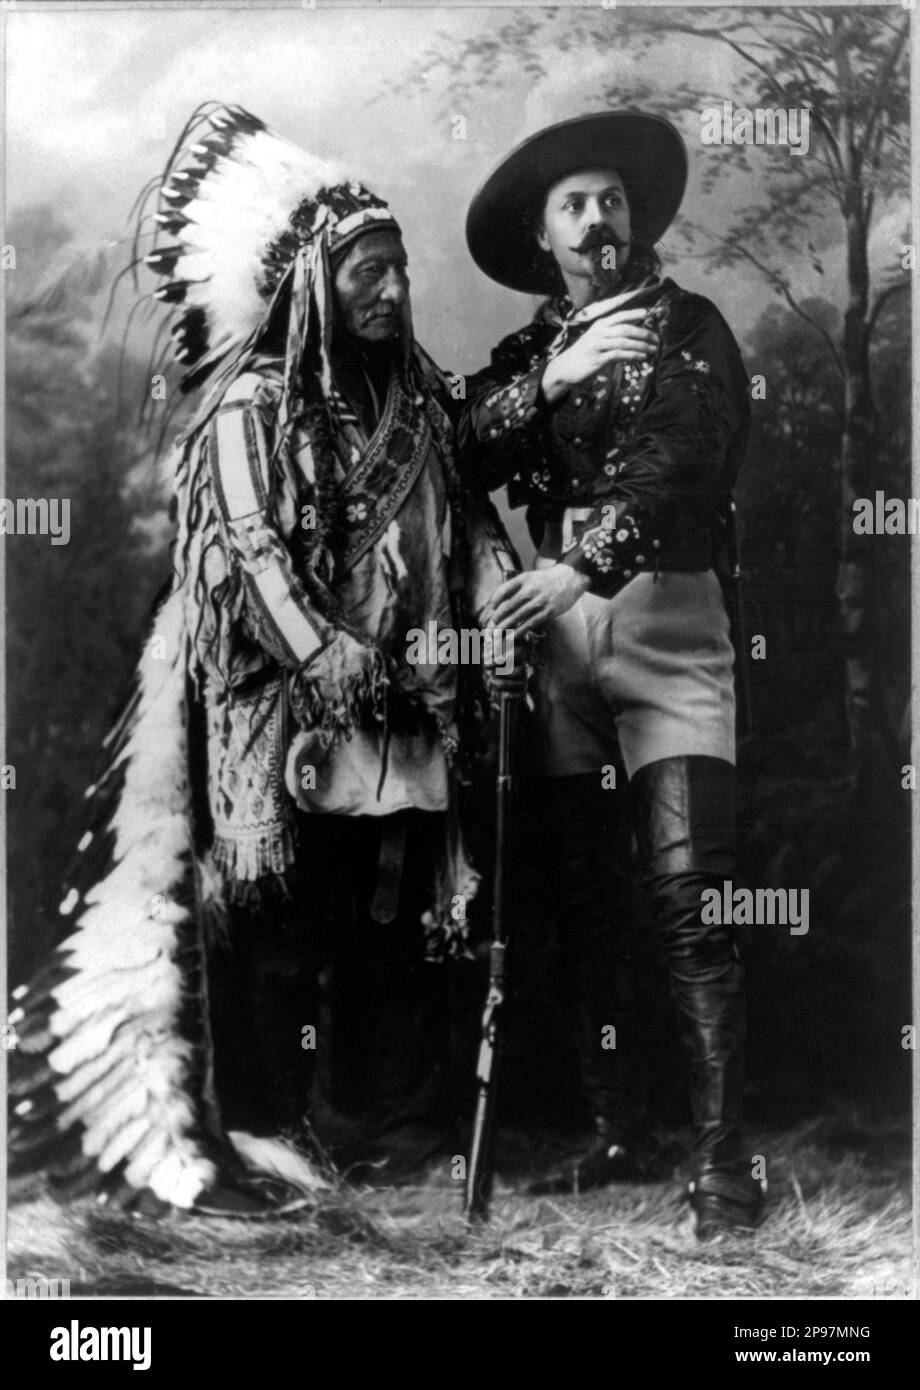 1855 , USA :  Colonel William Frederick CODY , know as BUFFALO BILL ( 1846 - 1917 ) at time of WILD WEST SHOW  international tour .  In this photo with ancient enemy chief SITTING BULL ( 1834ca - 1890 ) . Photo by  William Notman studios, Montreal, Quebec, Canada, during Buffalo Bill's Wild West Show, August 1885  .- Epopea del Selvaggio WEST - cowboy - cow-boy - cappello - hat Circus Barnum - fucile - gun - arma - rifle - baffi - barba - beard - moustache - frangie - fringes - leather - pelle  - Circo - boots - stivali - piume - feathers - NATIVE AMERICANS - INDIANO D' AMERICA - Indiani - TOR Stock Photo